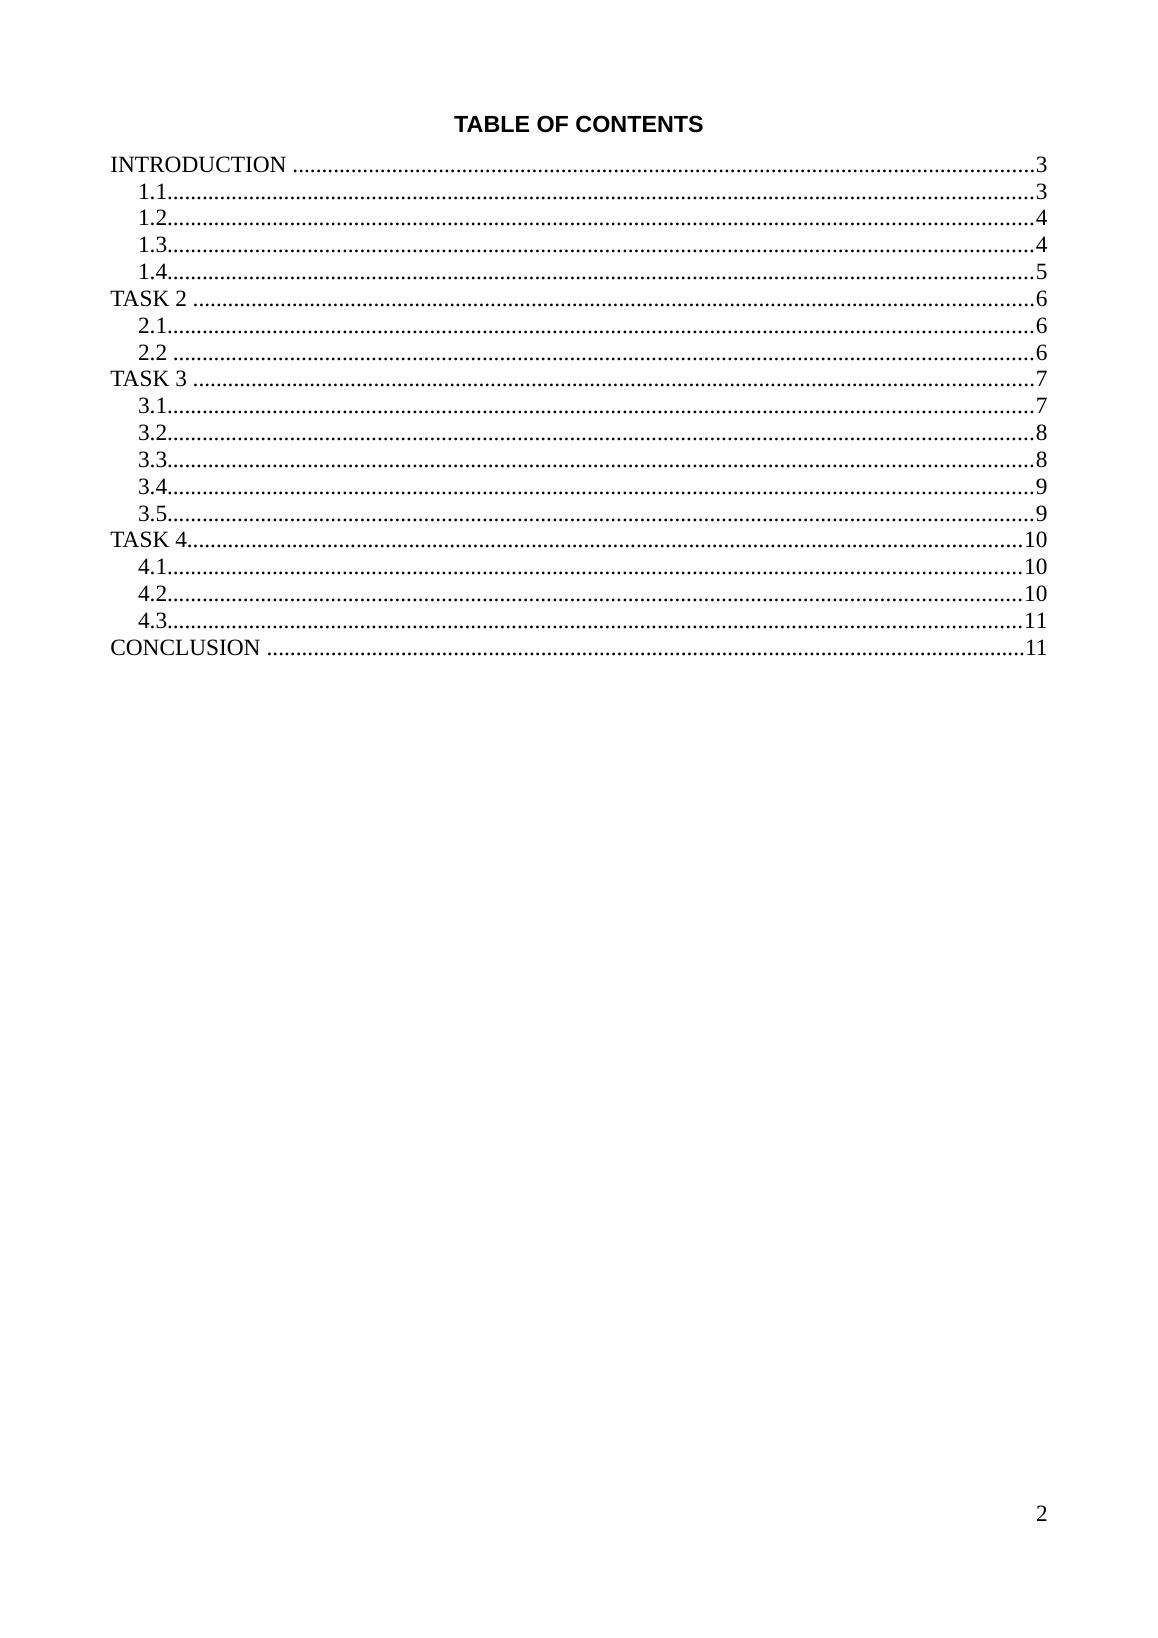 Market Research Report on Marketing Planning Planification TABLE OF CONTENTS_2